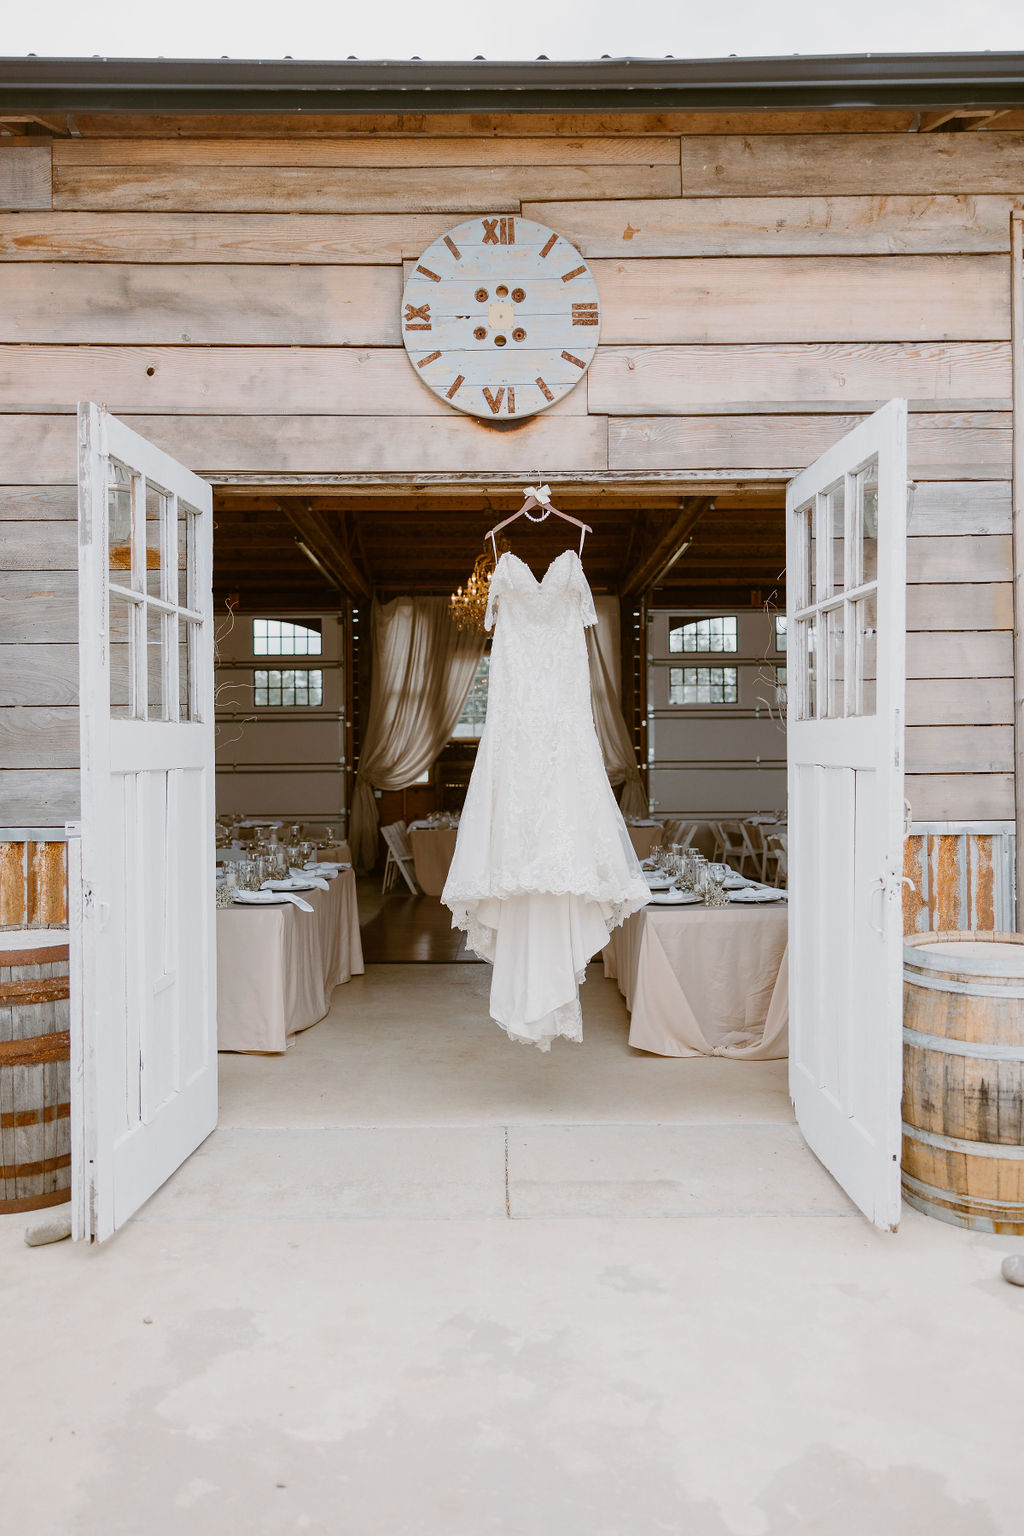 A wedding dress hangs from the rustic barn doors, ready for the ceremony.